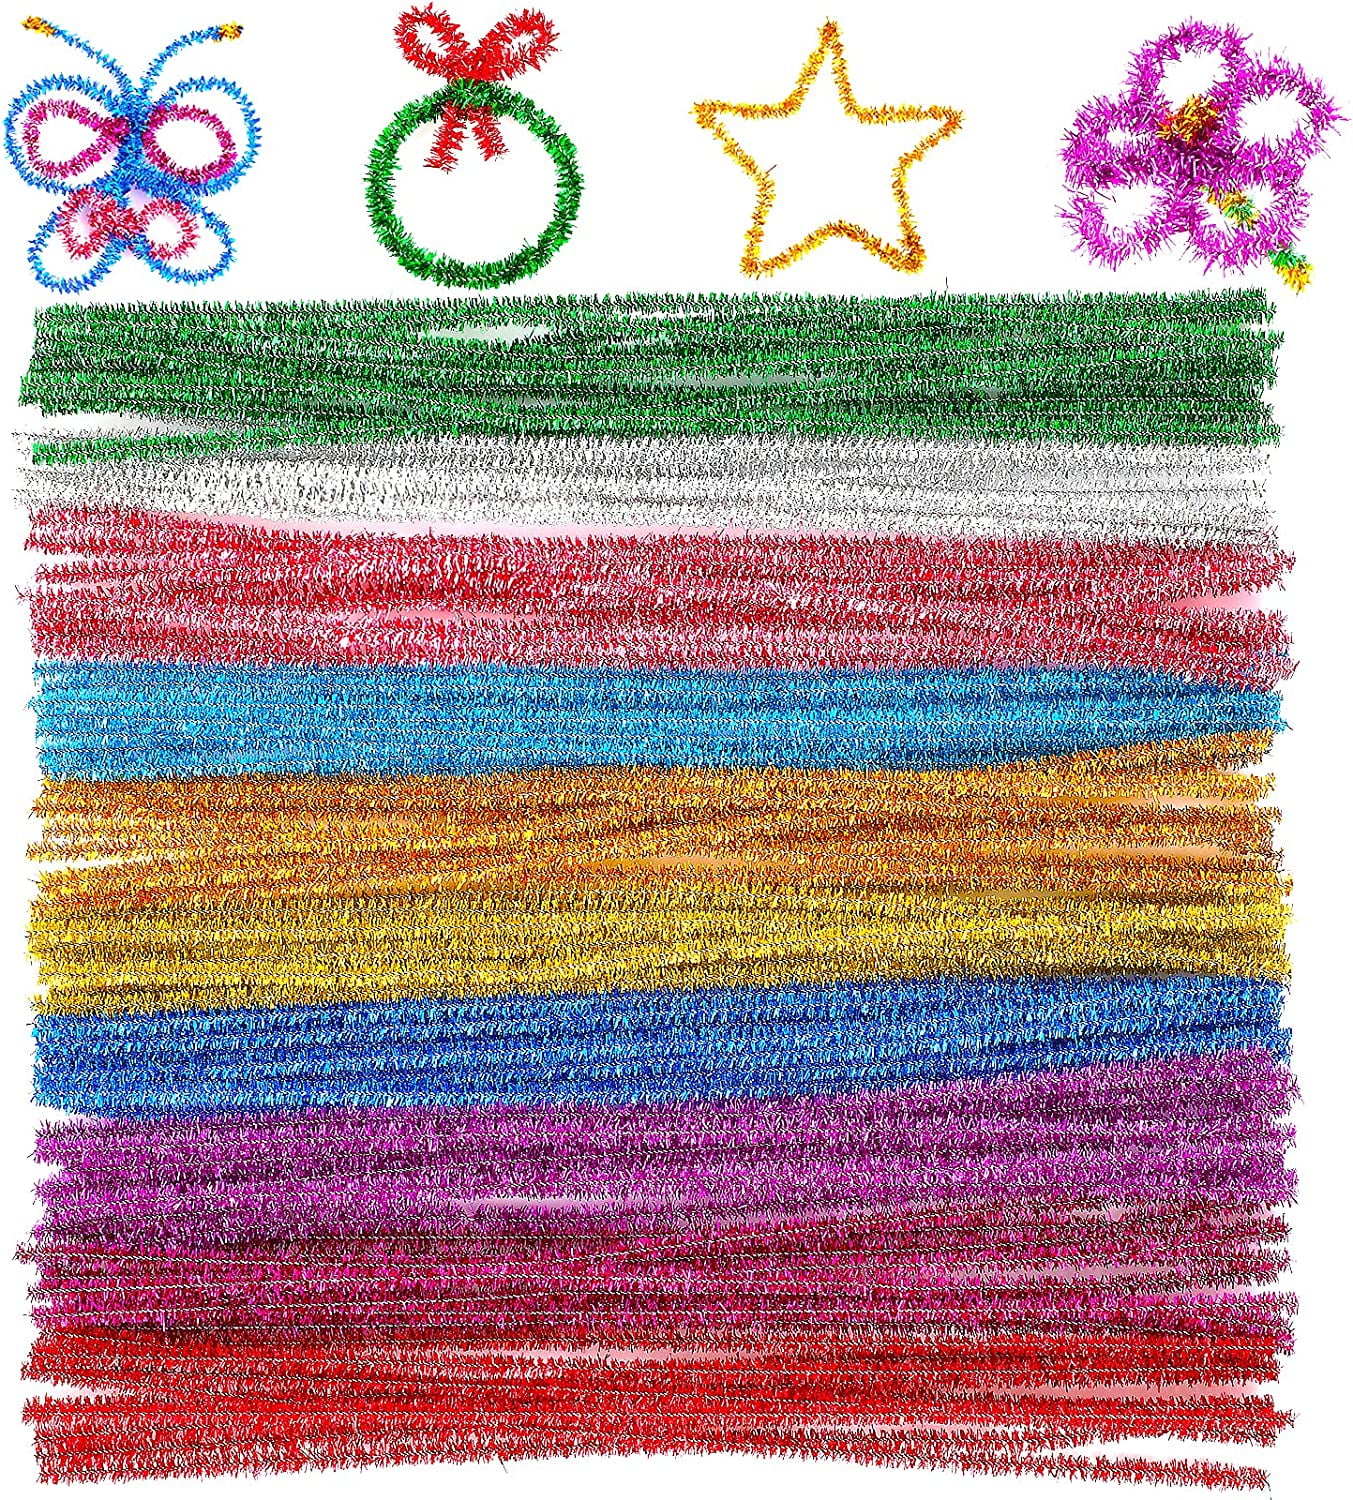 100 X Mixed Tinsel Metallic Jumbo Craft Pipe Cleaners Chenille